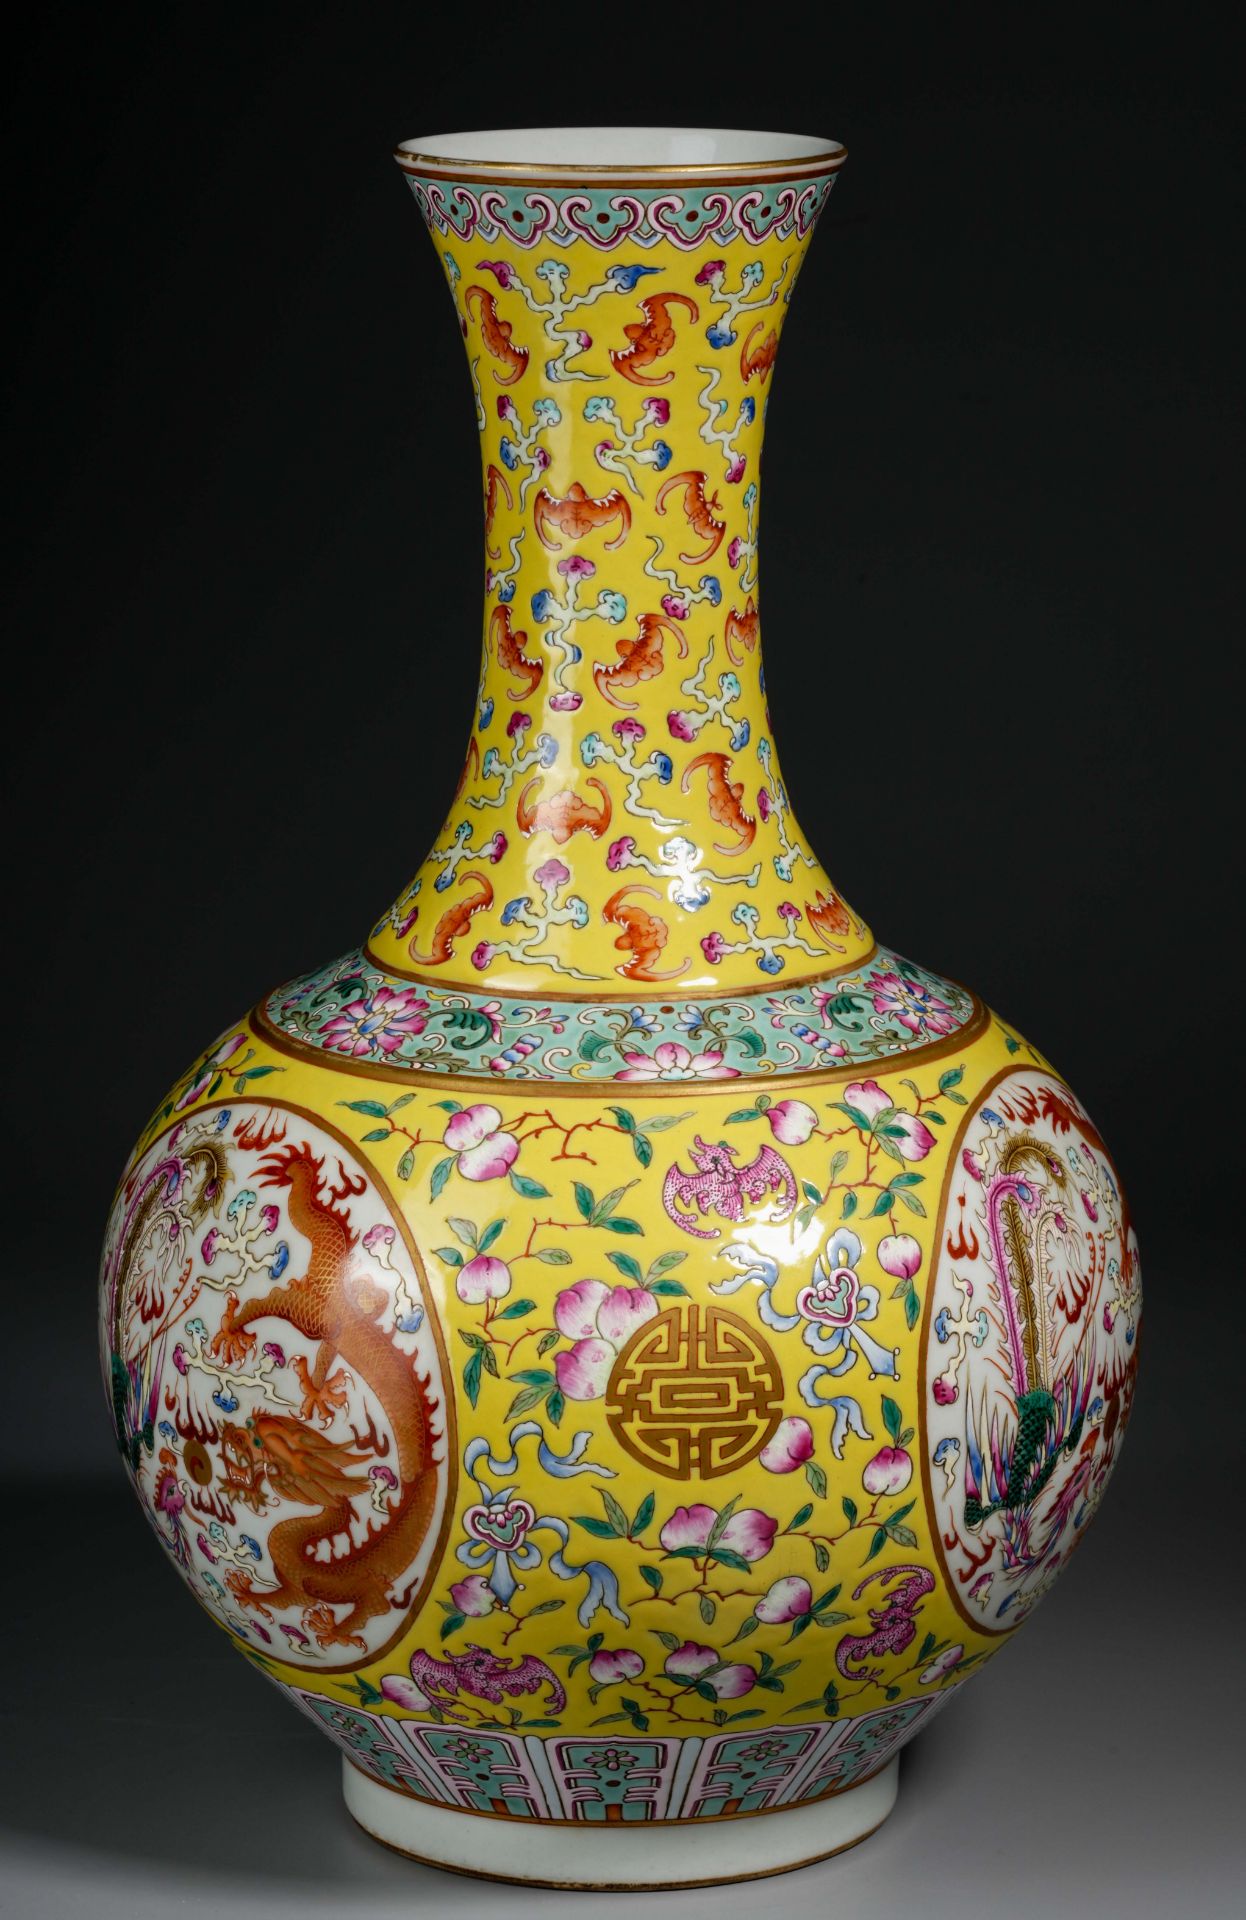 A Chinese Famille Rose and Gilt Decorative Vase - Image 7 of 10